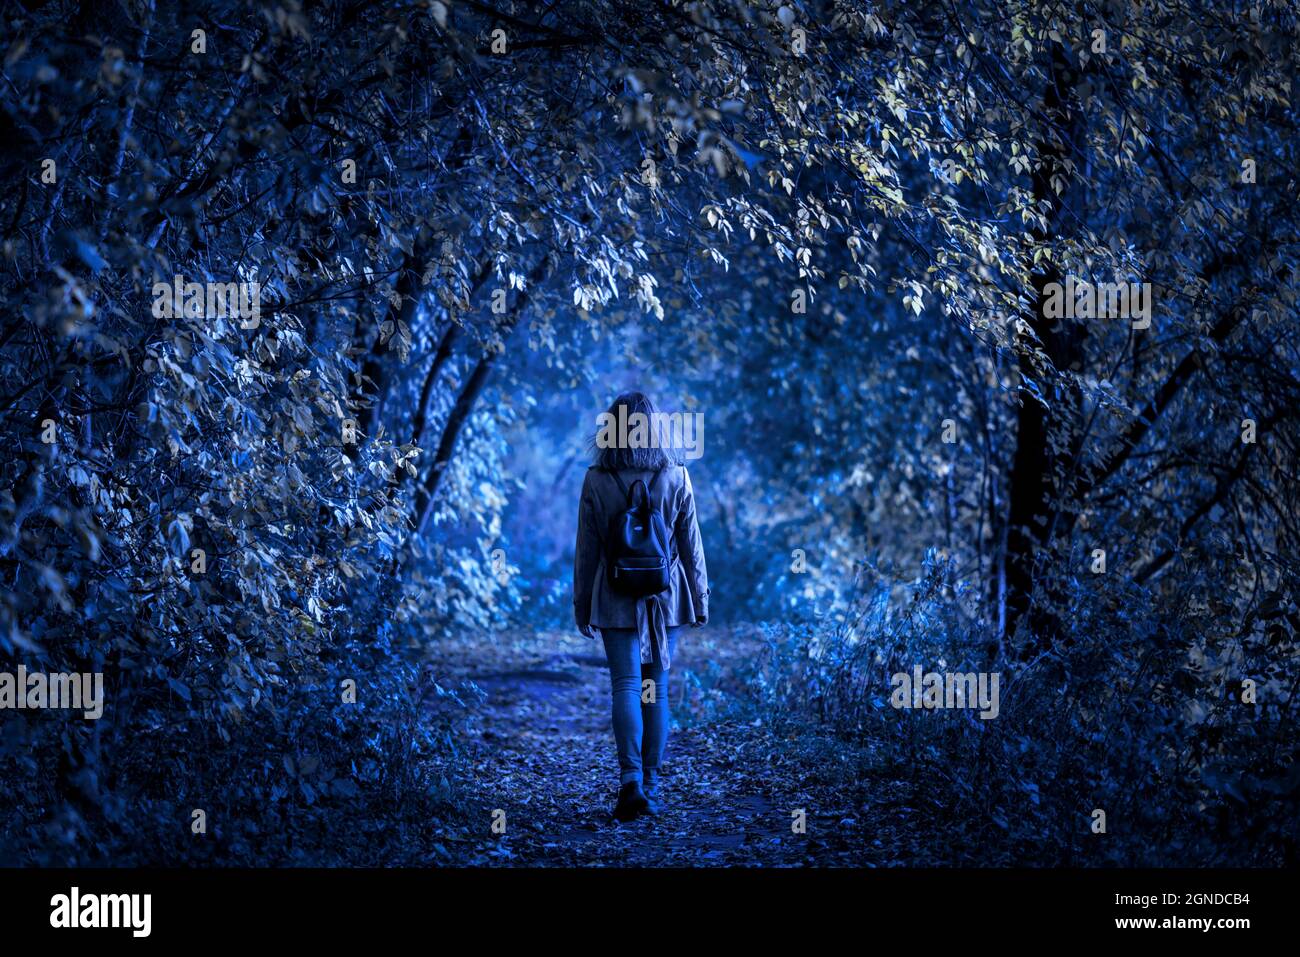 Dark forest on Halloween, young woman in fantasy spooky woods at night. Girl walking alone on path in mystic park. Lonely person in strange creepy pla Stock Photo